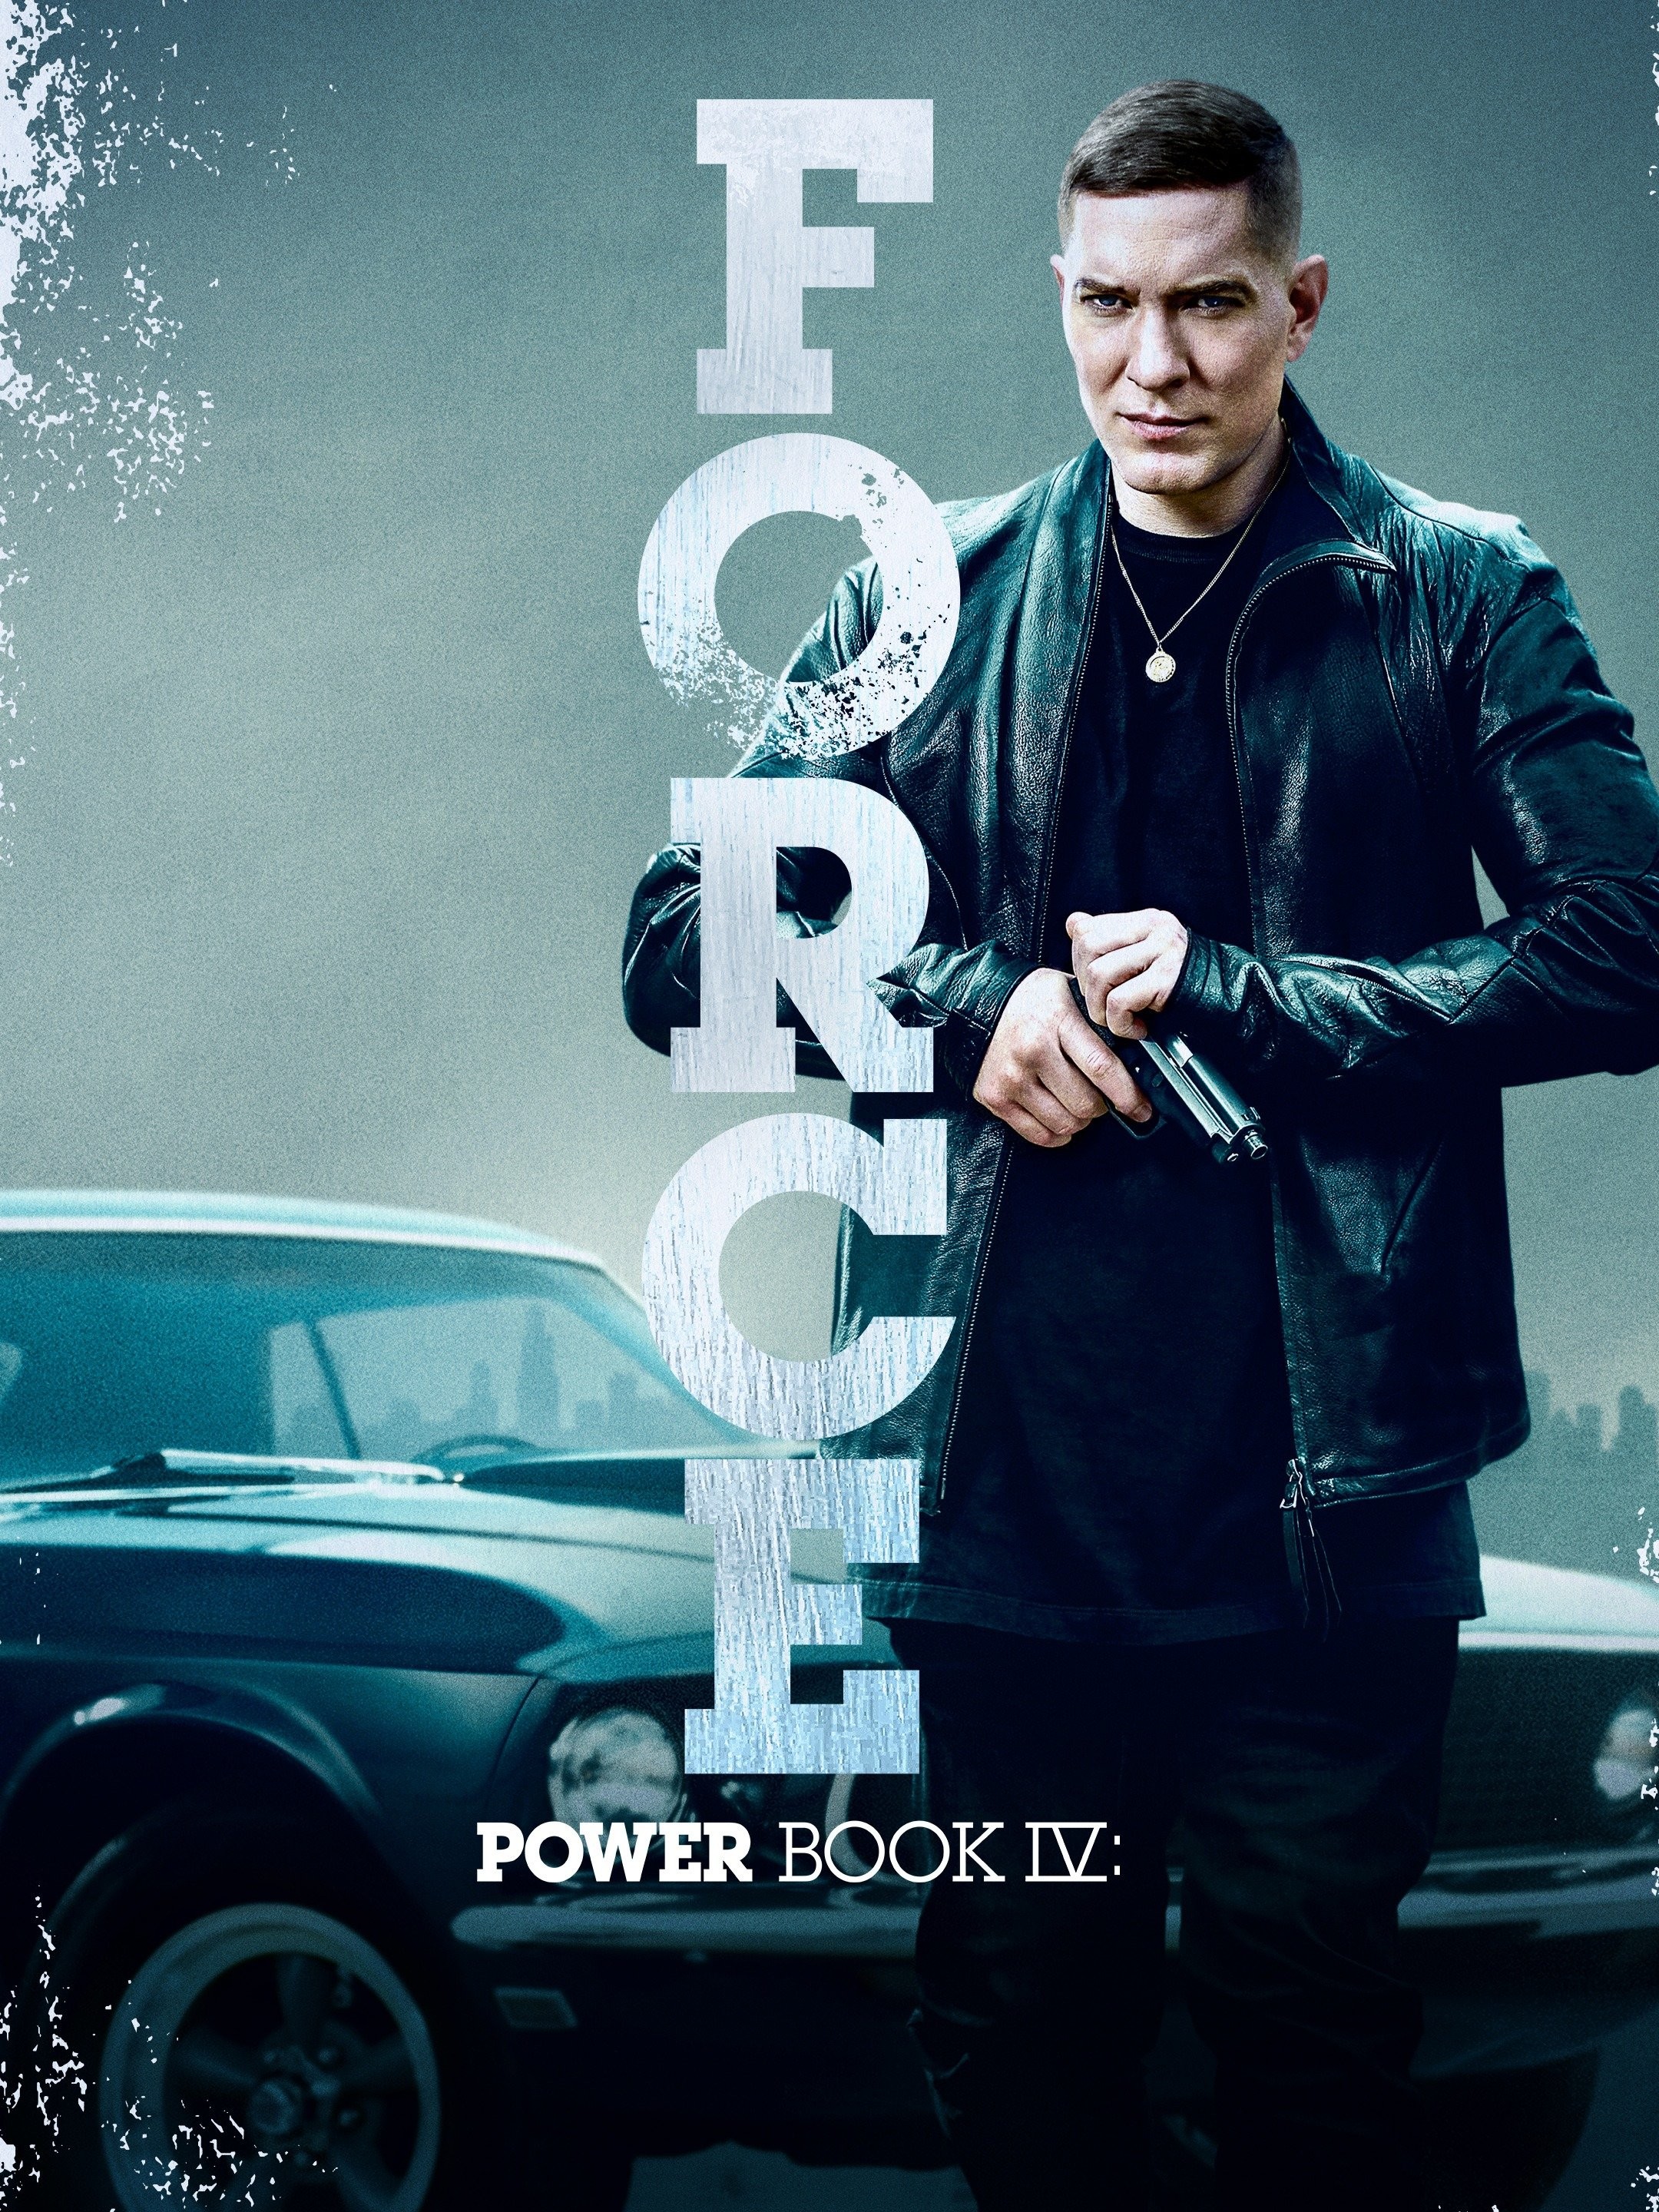 POWER BOOK IV FORCE Season 3 Trailer  Release Date And Everything We Know  